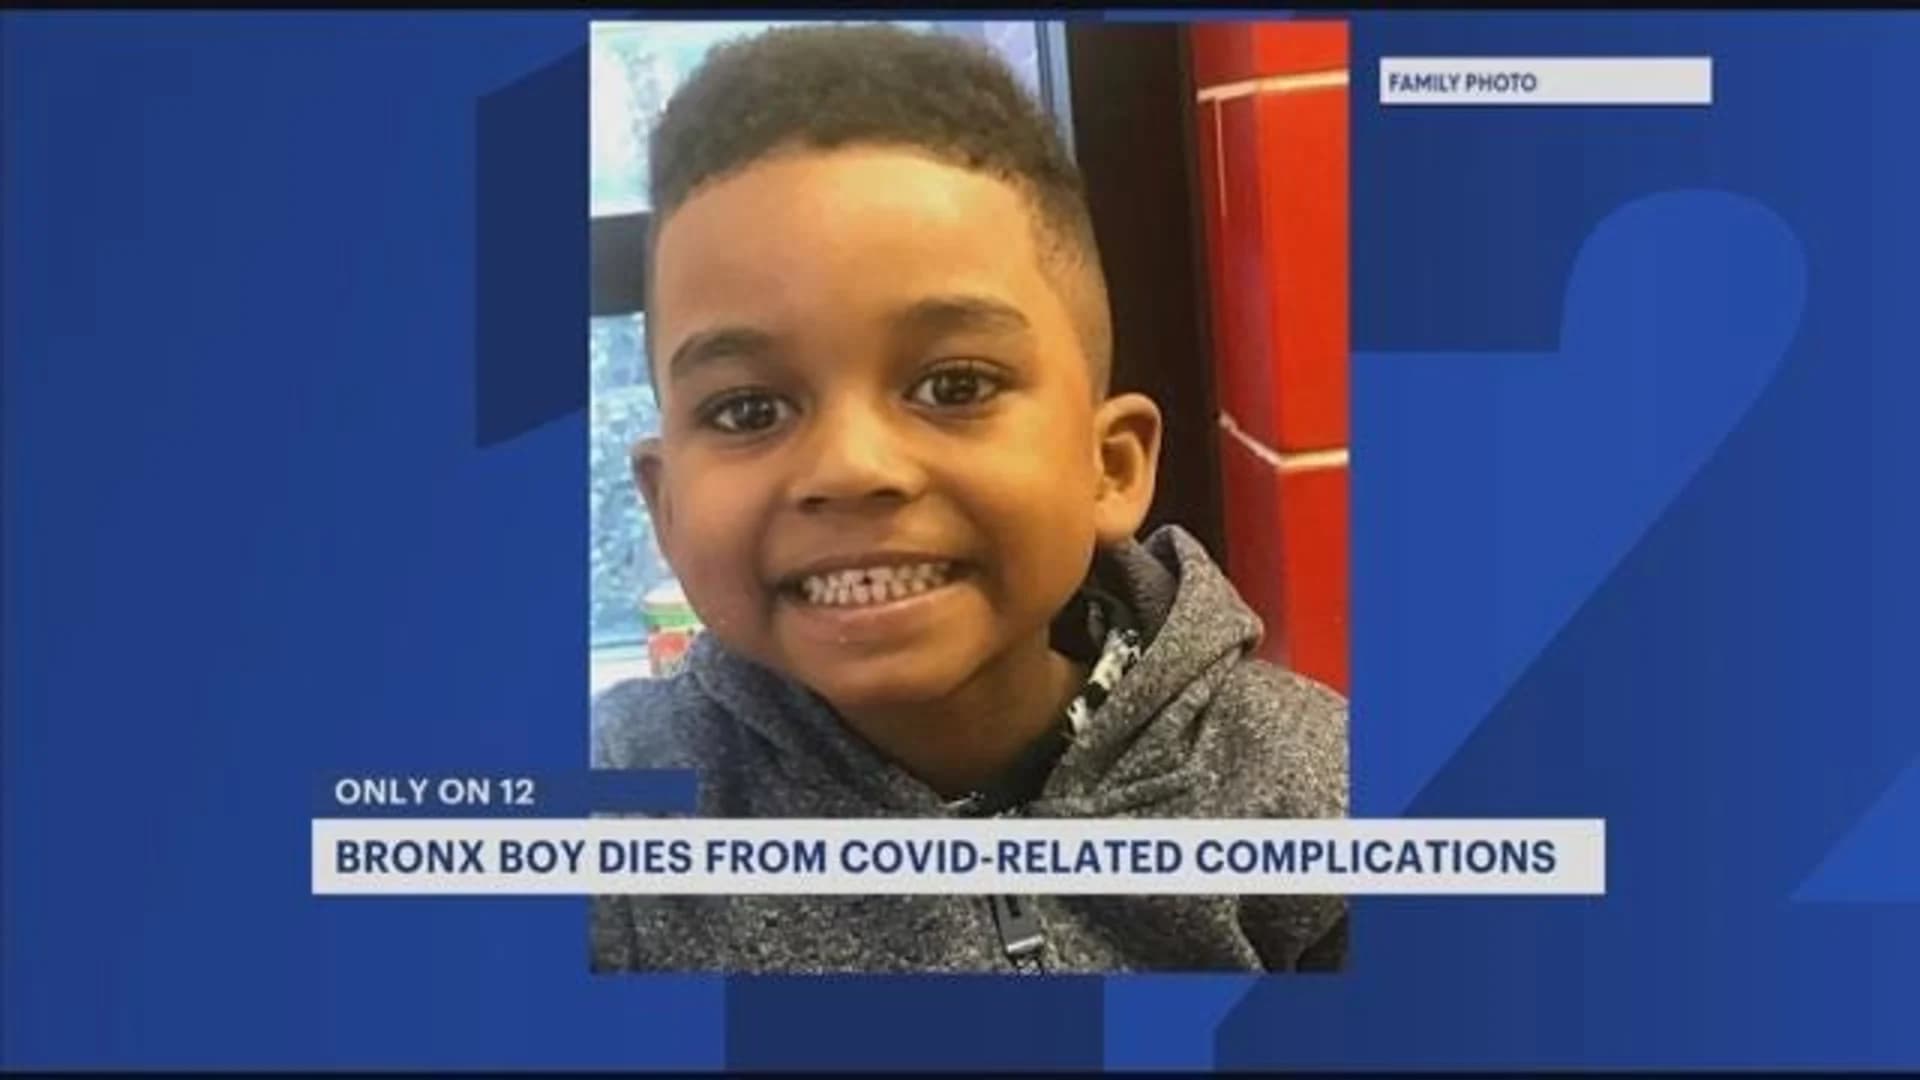 Bronx family reveals 5-year-old child died from complications due to COVID-19